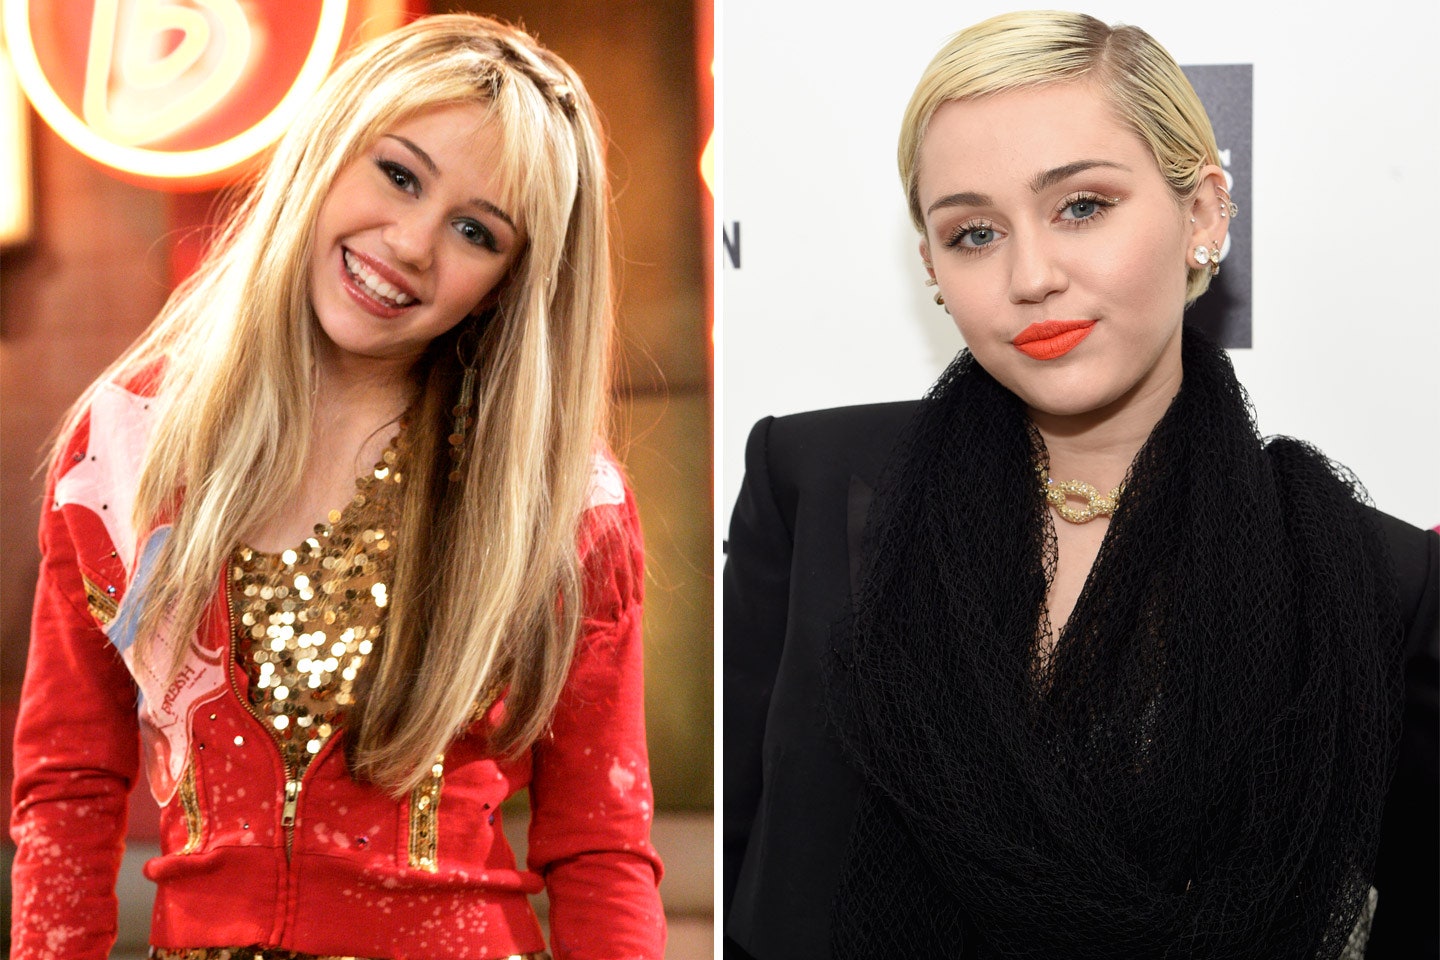 Hannah montana – the fashion bible of the american teen girl association in the 2000s